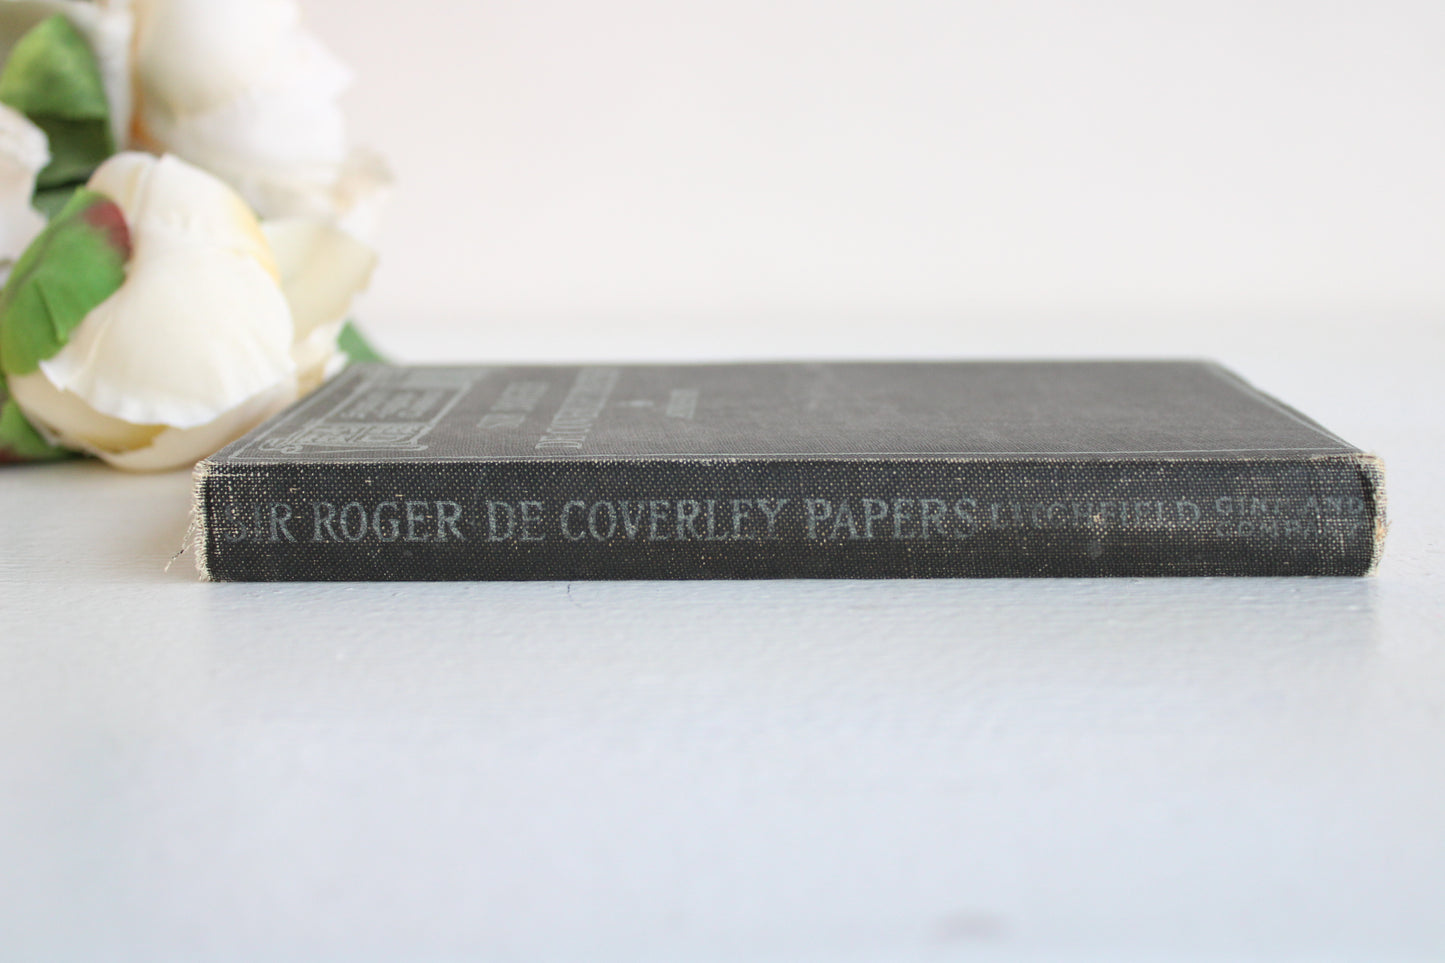 Antique 1800s Book, "Sir Roger DeCoverly Papers"